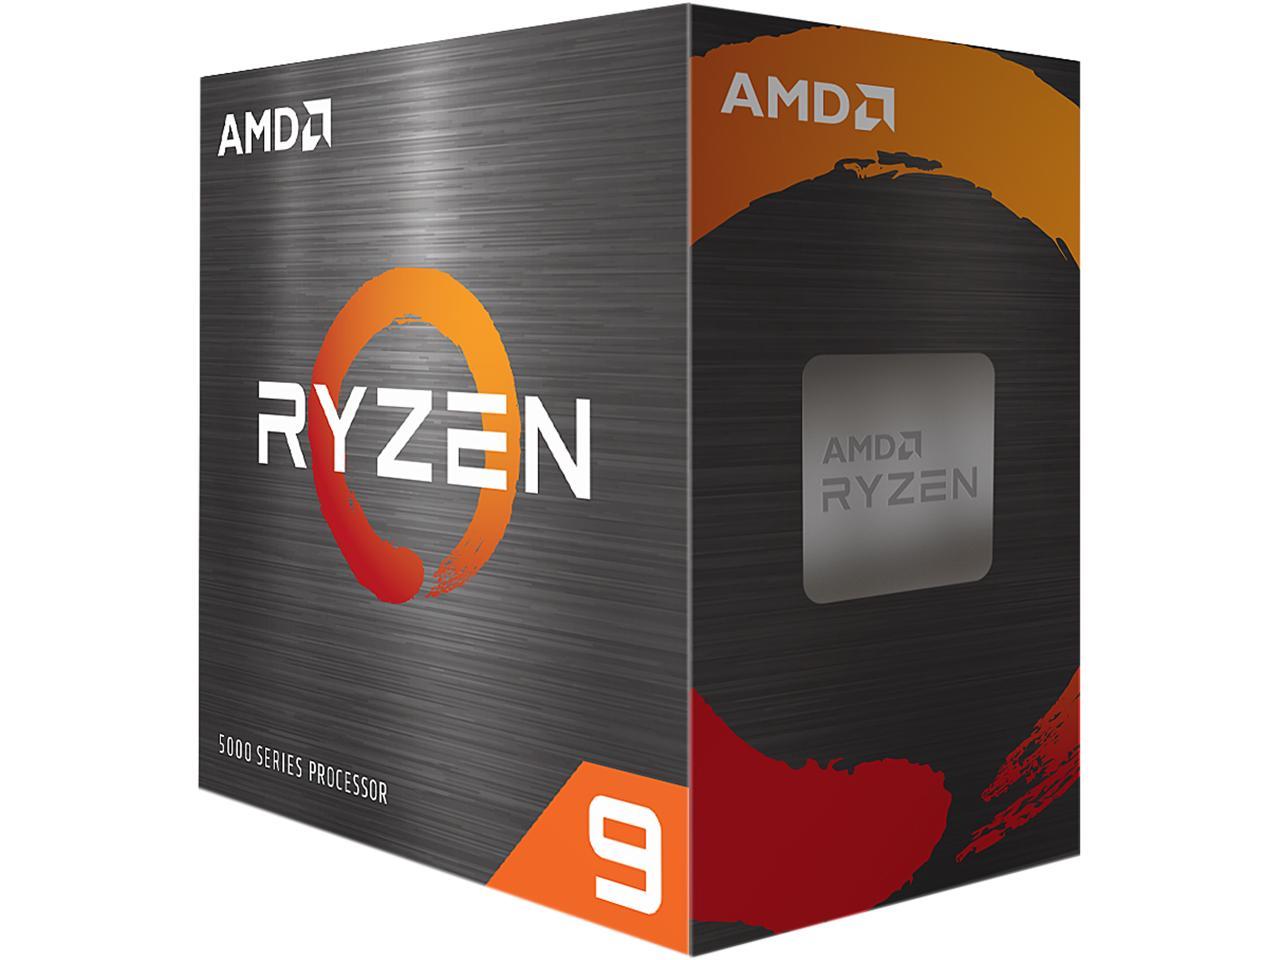 AMD Ryzen 9 5900X Vermeer 3.7GHz 12-Core AM4 Boxed Processor $314 + Free Shipping